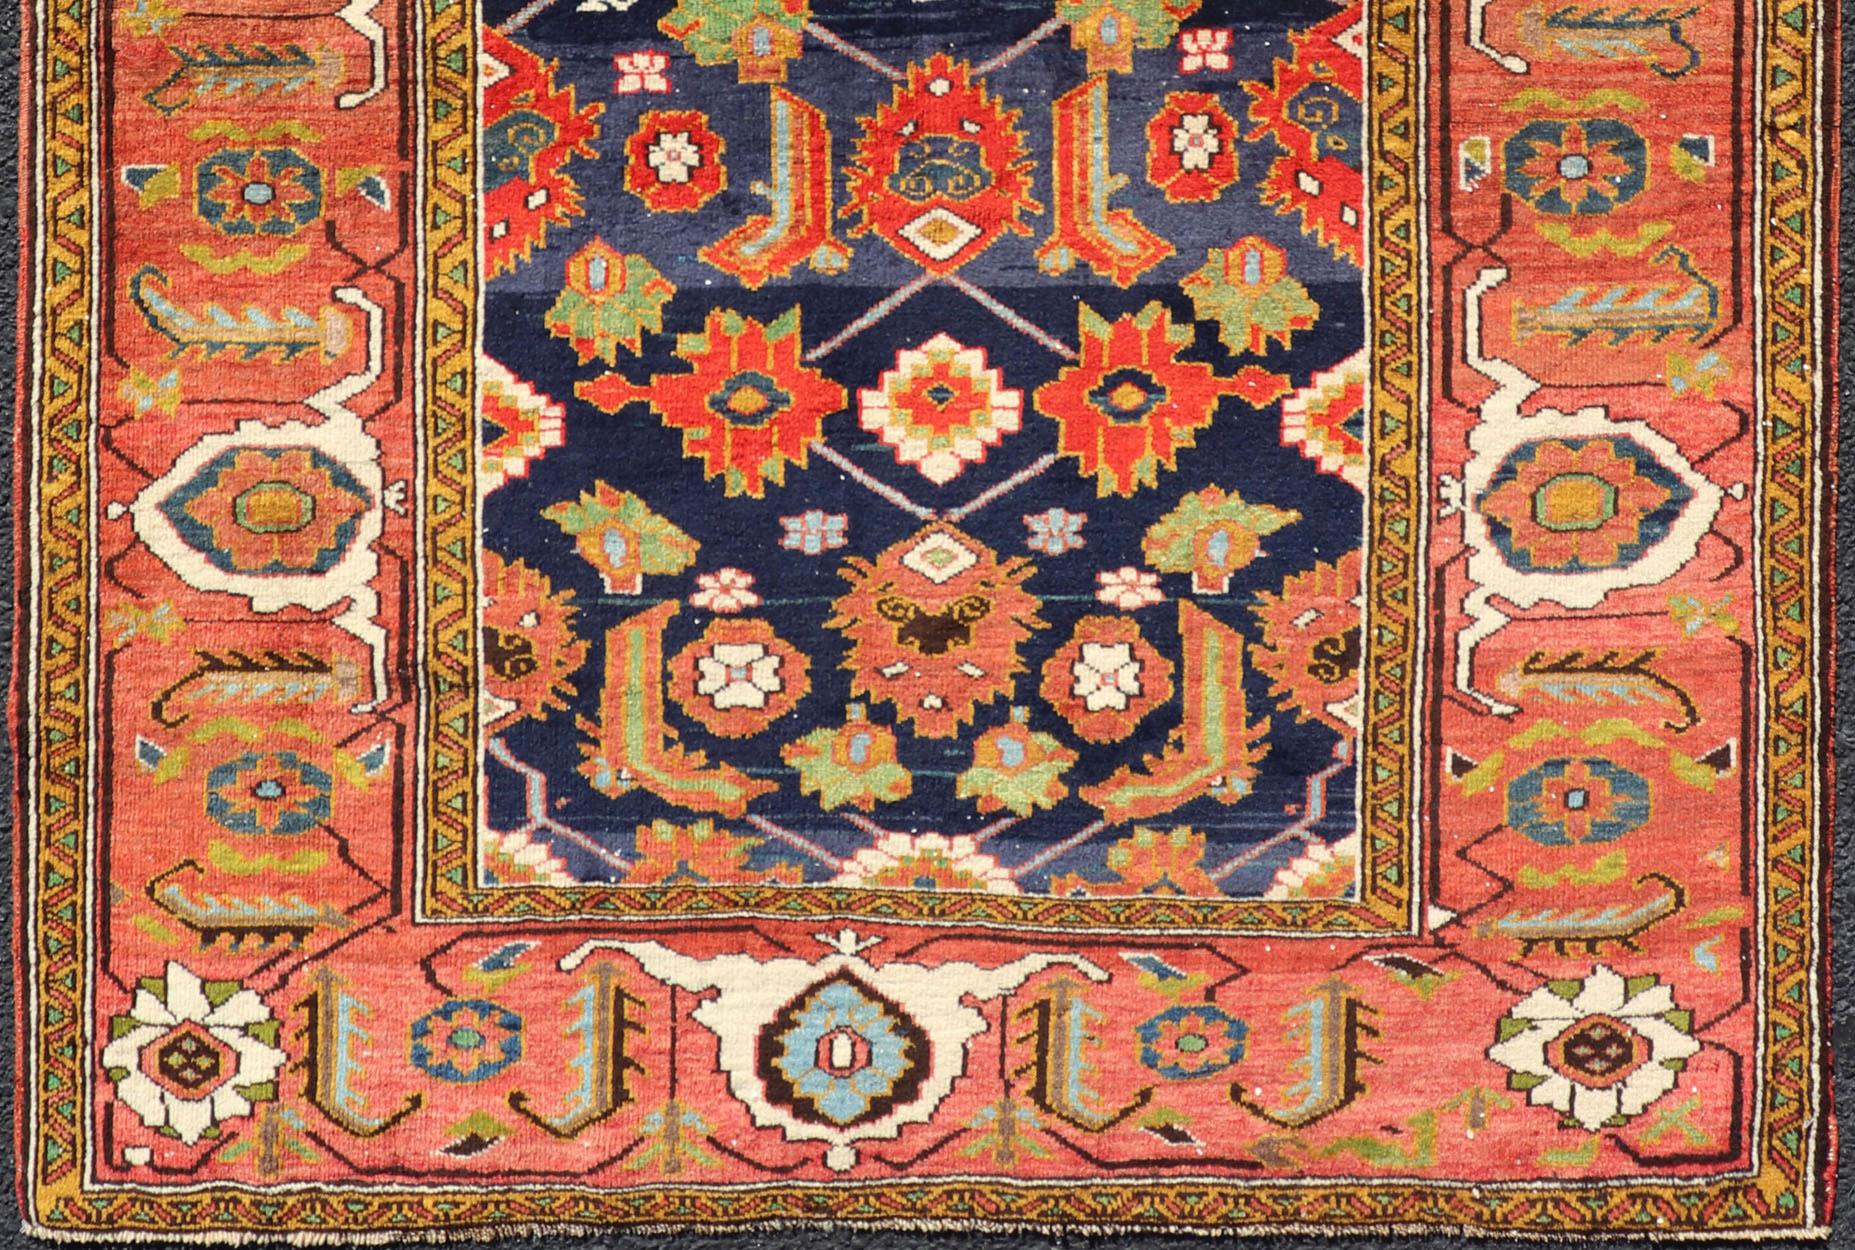 Antique Caucasian Rug with All-Over Design in Royal Blue Field, Soft Red & Green. Keivan Woven Arts/ rug/ EMB-9510-P13527, Caucasian Rug, Early 20th century Caucasian
Measures: 3'11 x 5'8 
With brilliant and well kept original colors, this fine